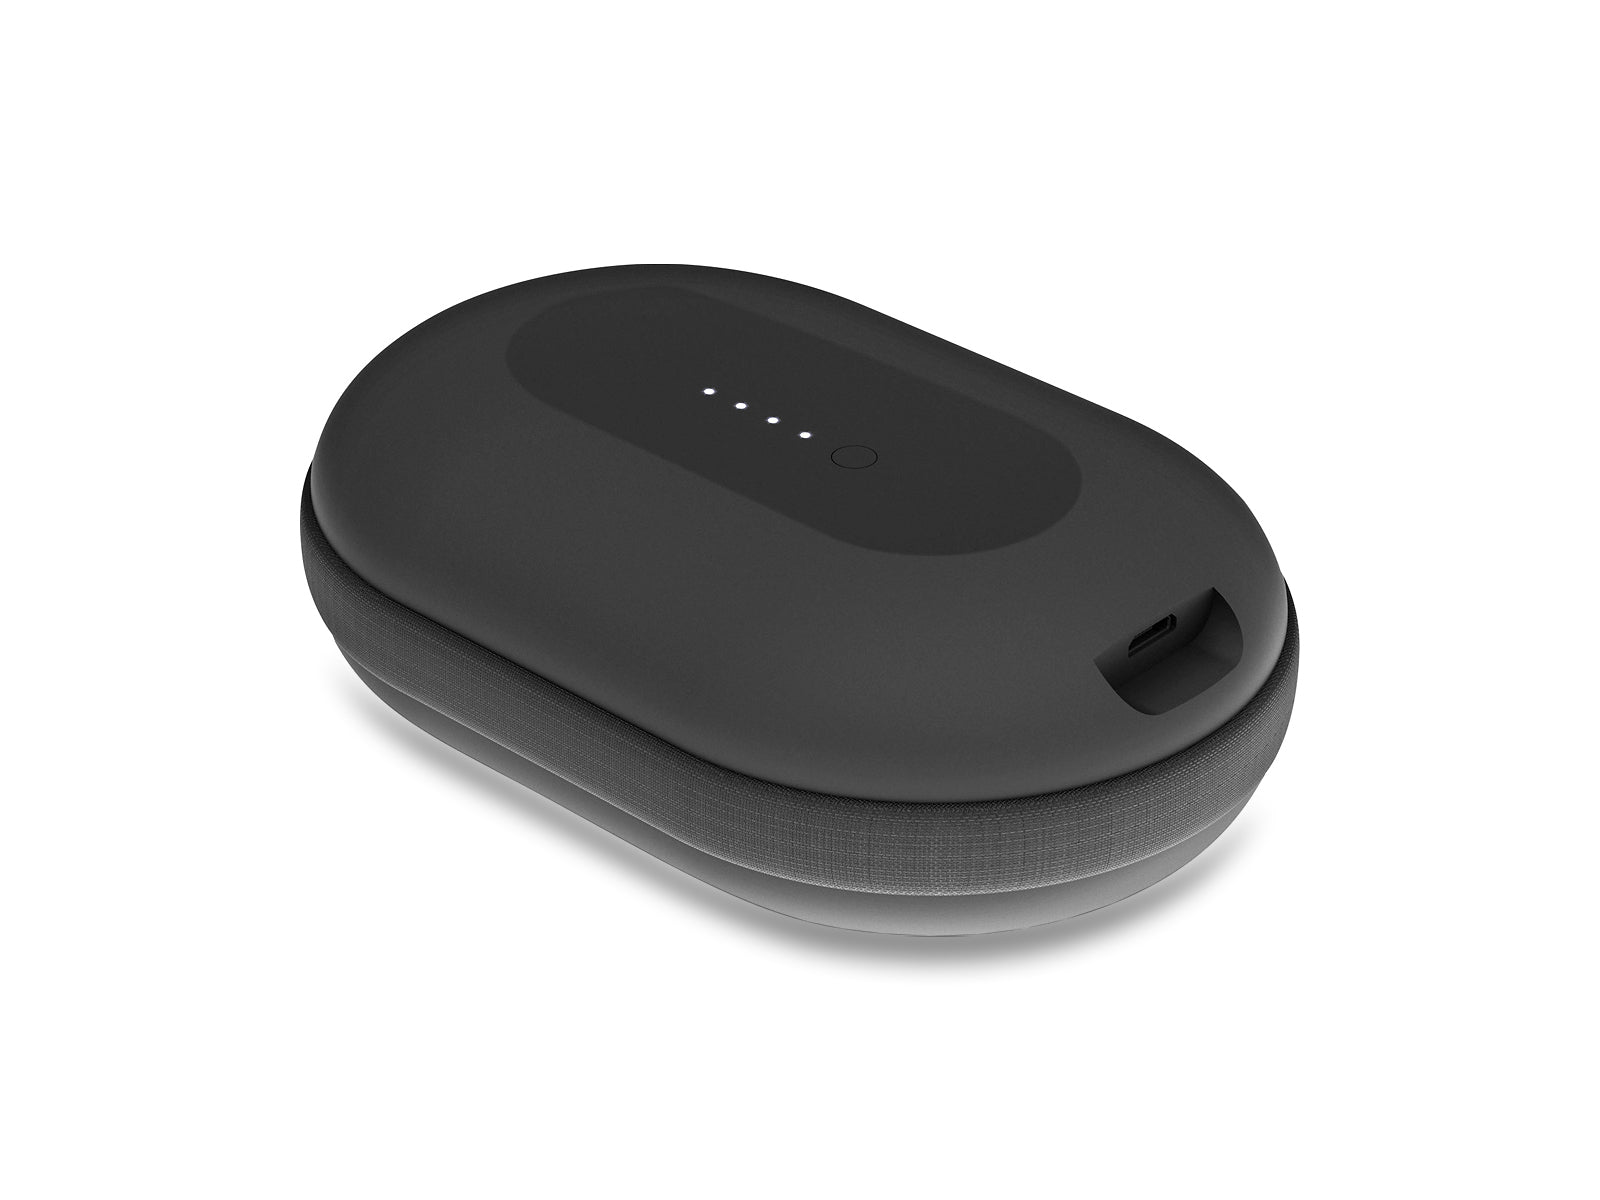 Mophie Portable Power Capsule Charger